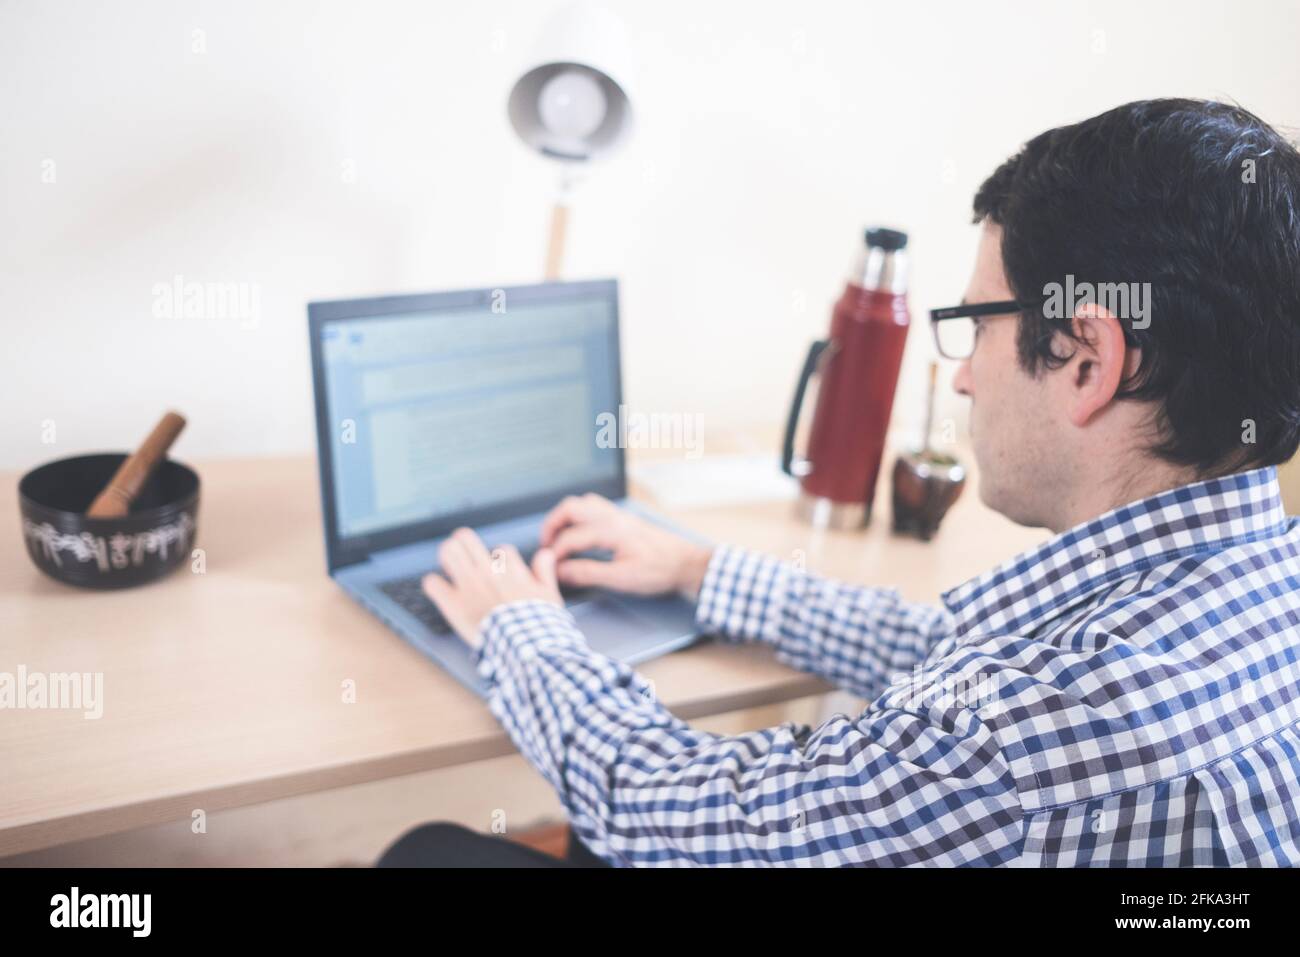 A man drinks mate while teleworking at home Stock Photo